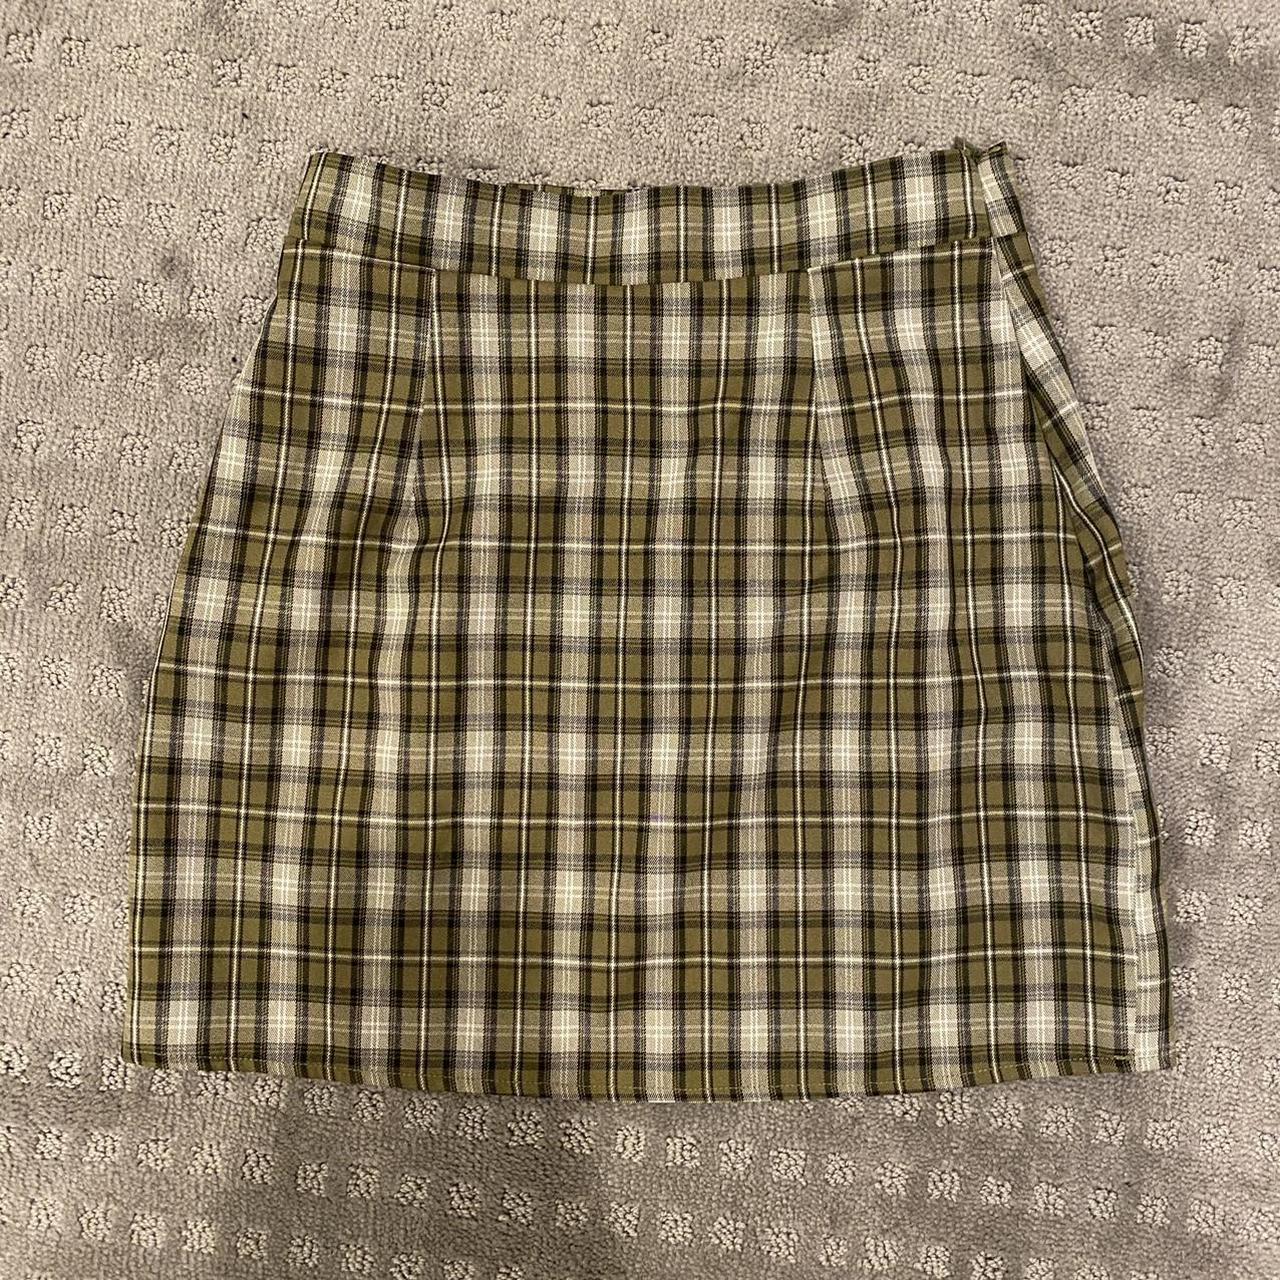 Product Image 2 - 🌿 Yesstyle Green Plaid Skirt